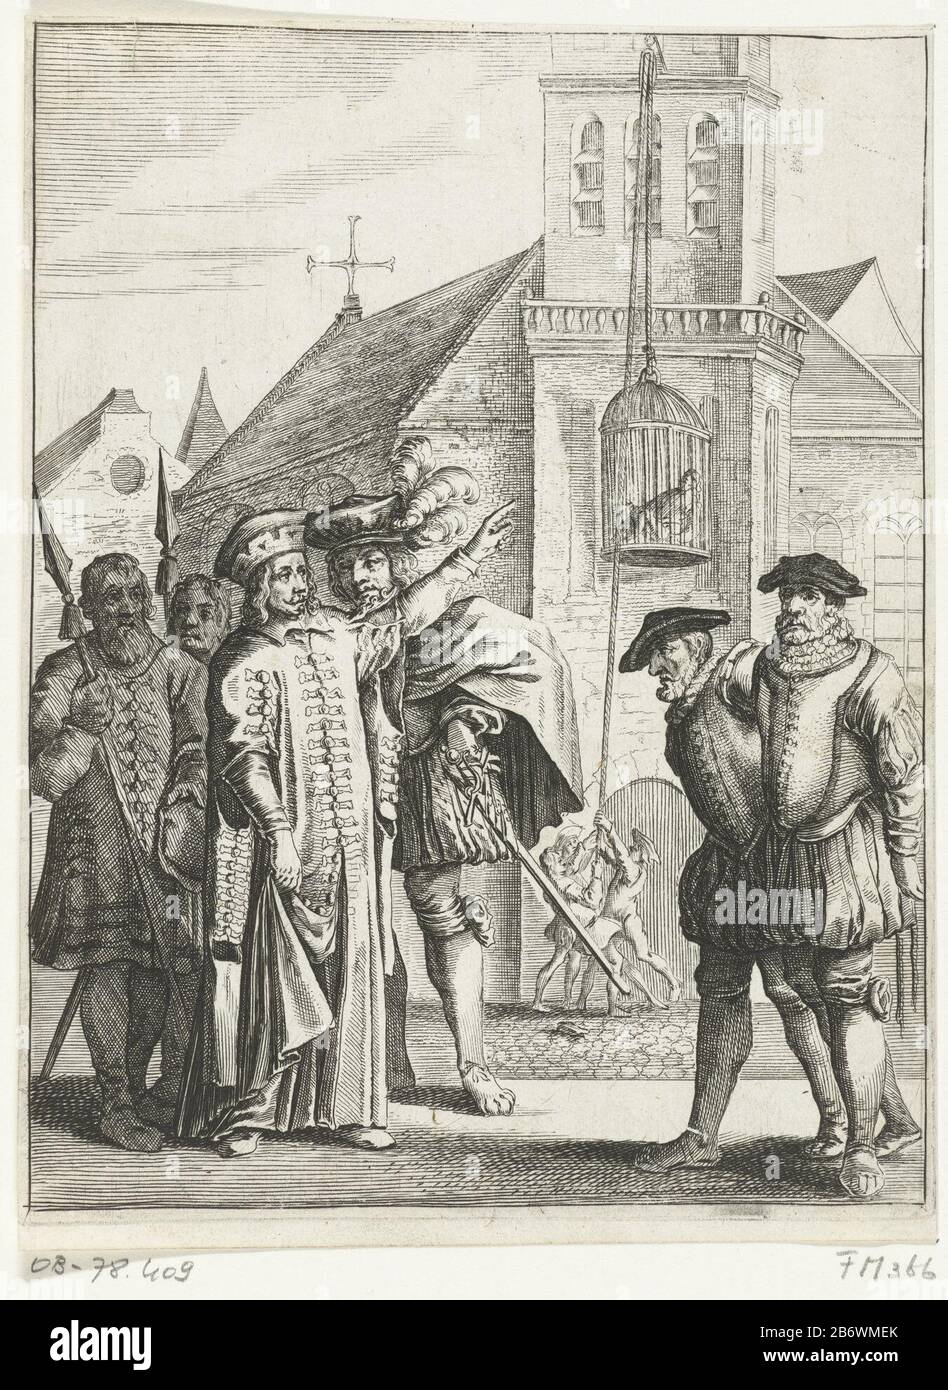 Jan Kruyze en Willem van Deutichem om beurten gestraft in de Wassenaarskooi te Hattem, 1520 Jan Kruyze, steward of Salland and William of Deutichem , Deventer sheriff be punitive in turn locked in the Wassenaar cage, the cage Jan Wassenaar, Hattem, 1520. Scene takes place in the open air, in the background the car on the outside of the tower hoisted manufacture manufacturer: printmaker : anonymous location manufacture: Northern Netherlands Date: 1650 - 1699 Physical characteristics: etching and engra material: paper Technique: etching / engra (printing process) Measurements: paper: h 193 mm × Stock Photo